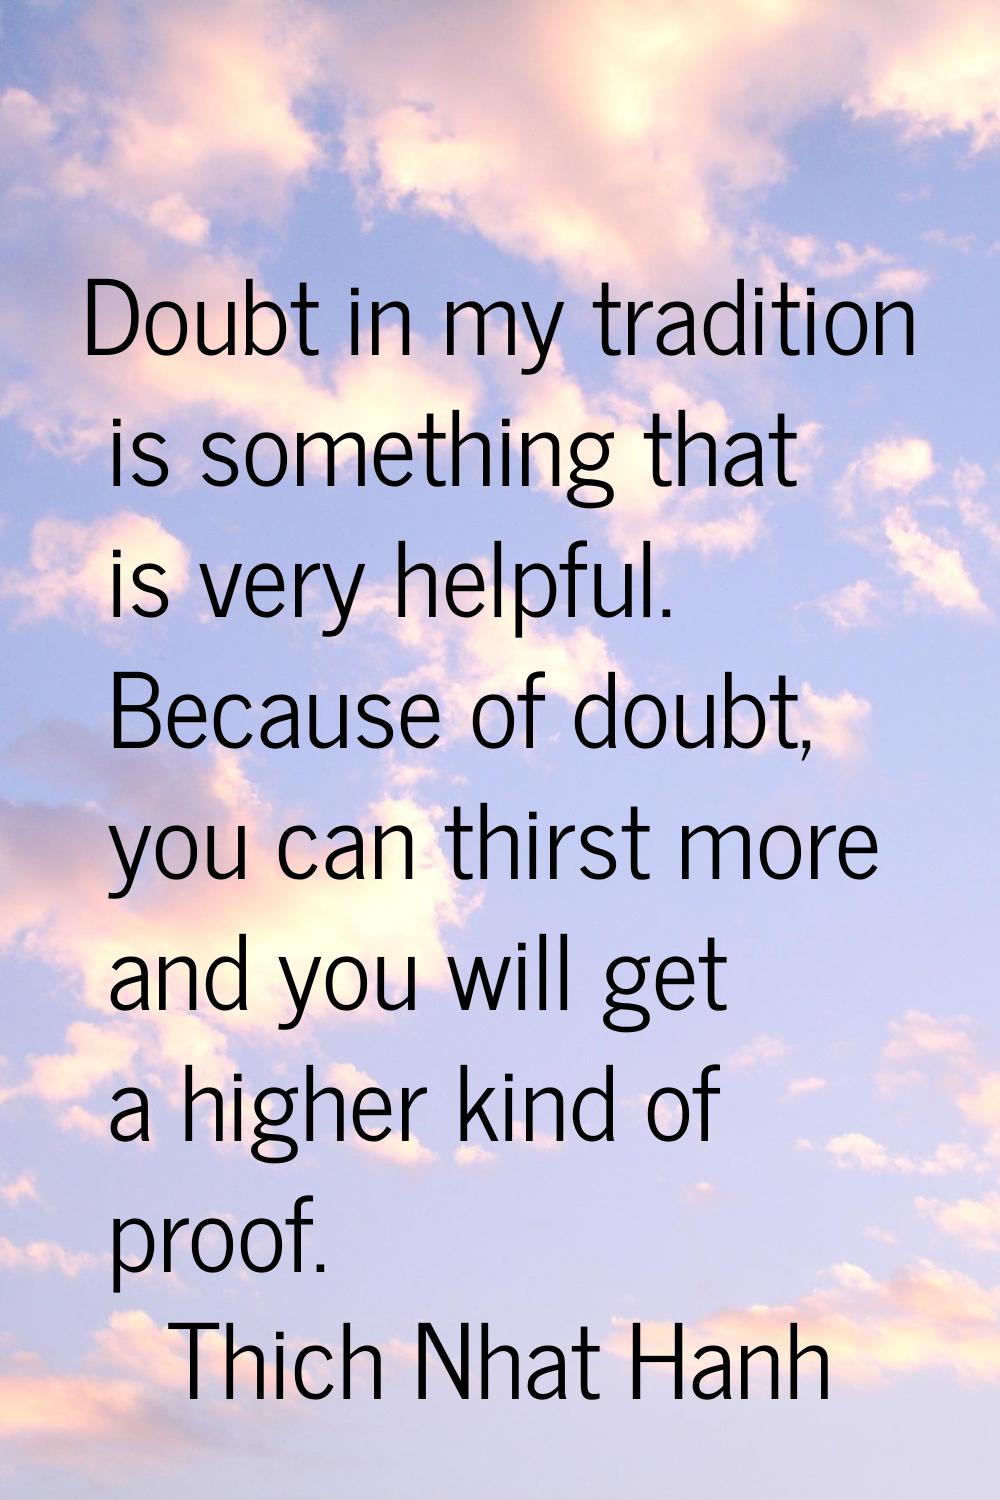 Doubt in my tradition is something that is very helpful. Because of doubt, you can thirst more and 